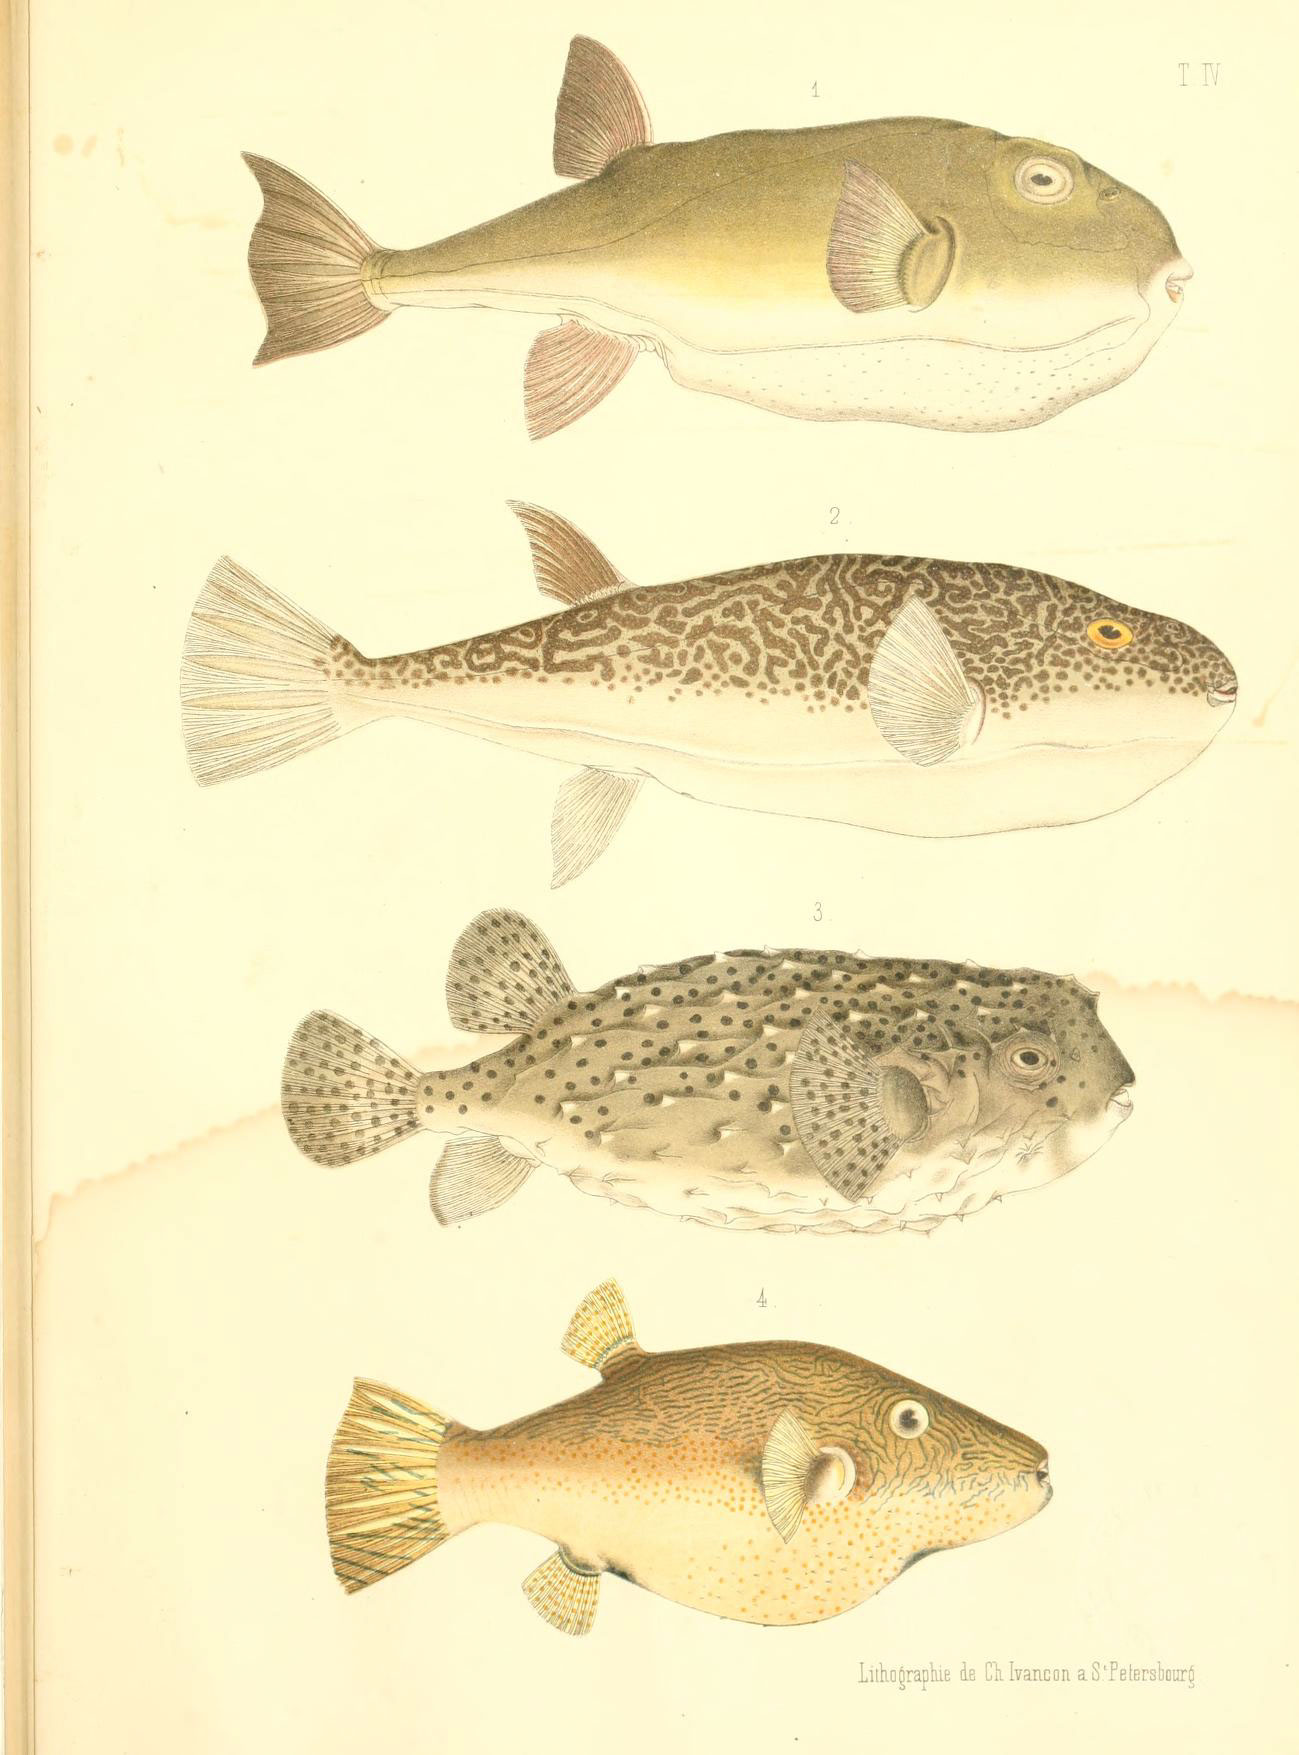 an illustration shows the different types of fish